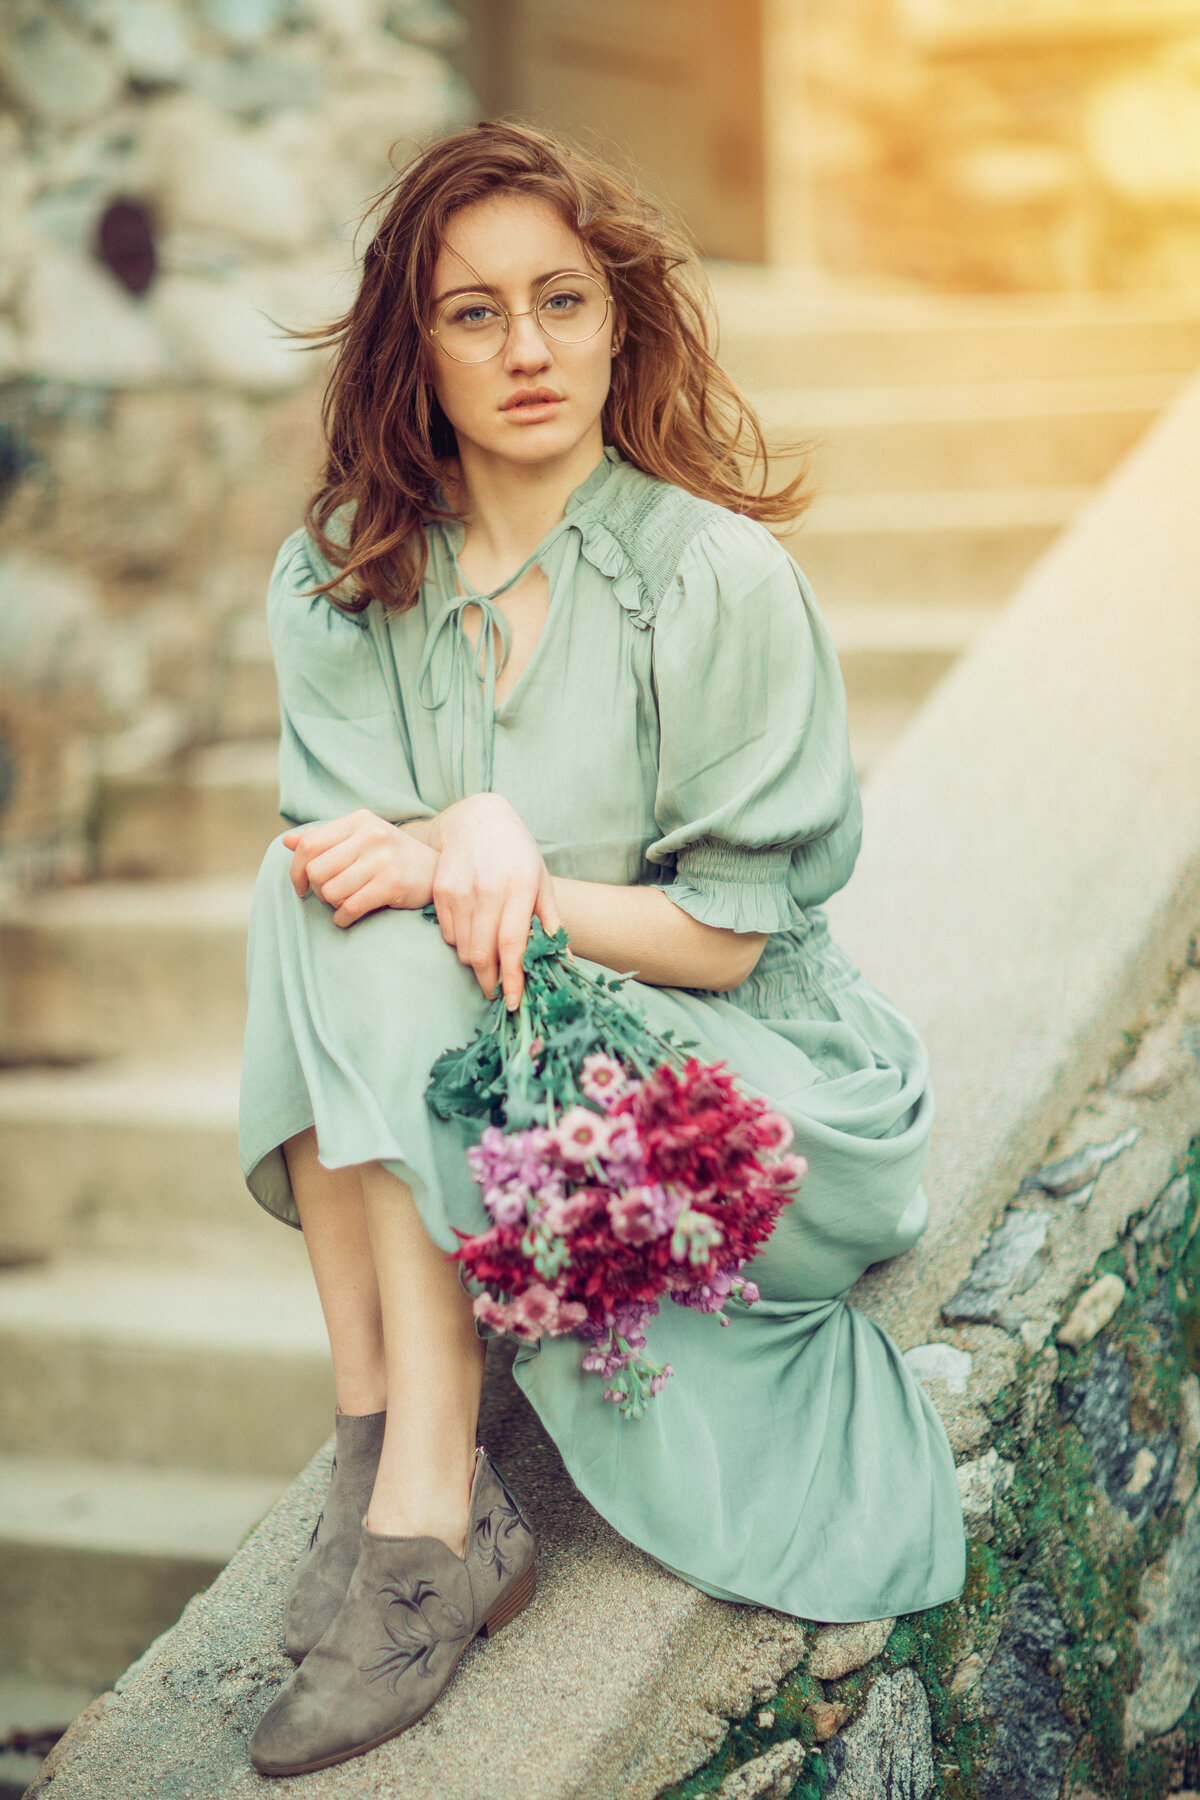 Portrait Photo Of Young Woman In Green Dress Holding Flowers Los Angeles